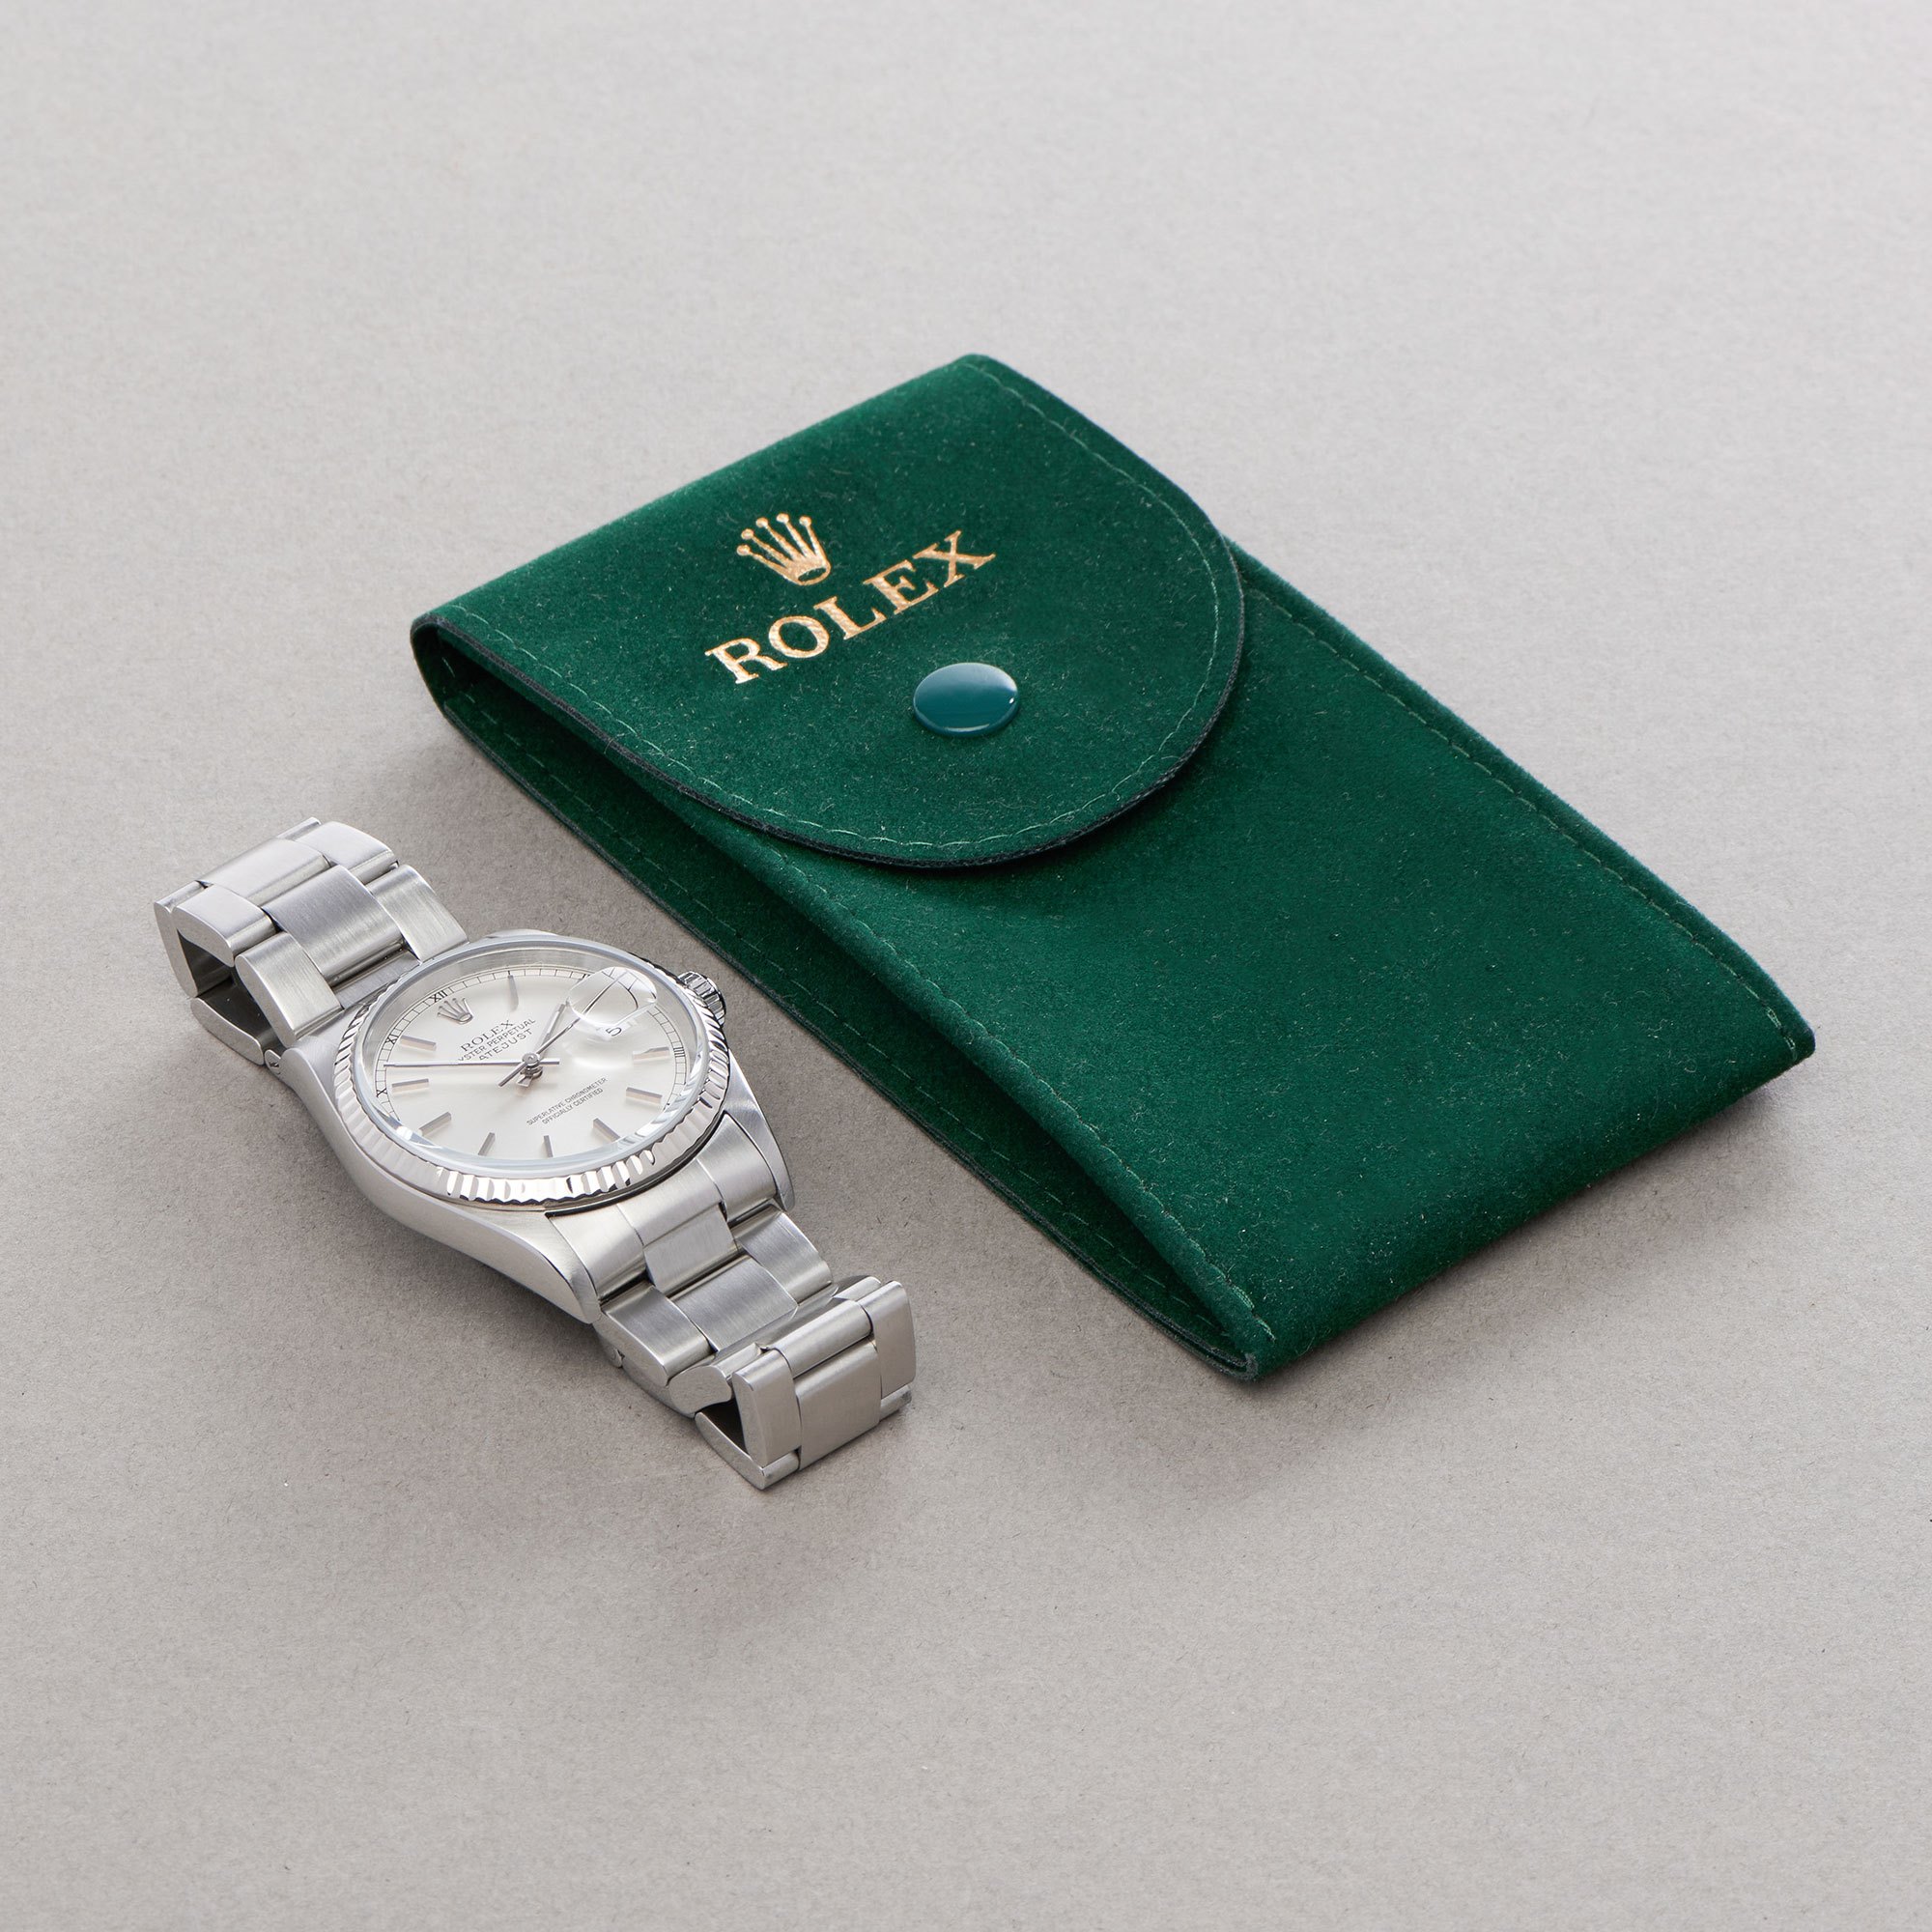 Rolex Datejust 36 Roestvrij Staal 16234